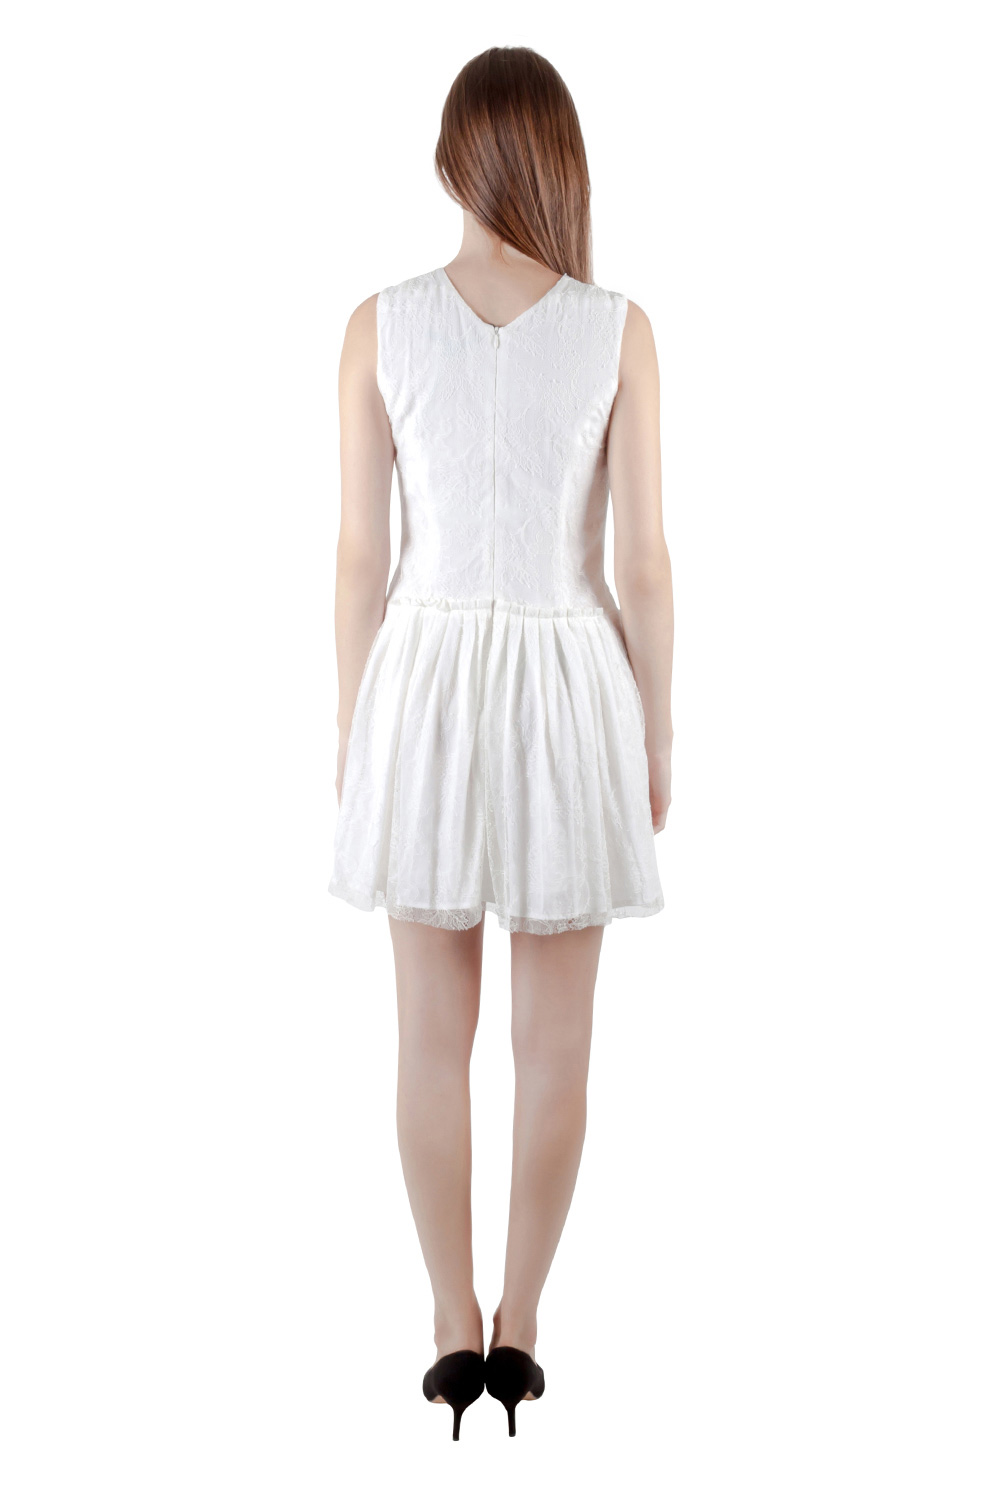 Pre-owned Theory Theyskens  White Lace Sleeveless Dinal Dress M